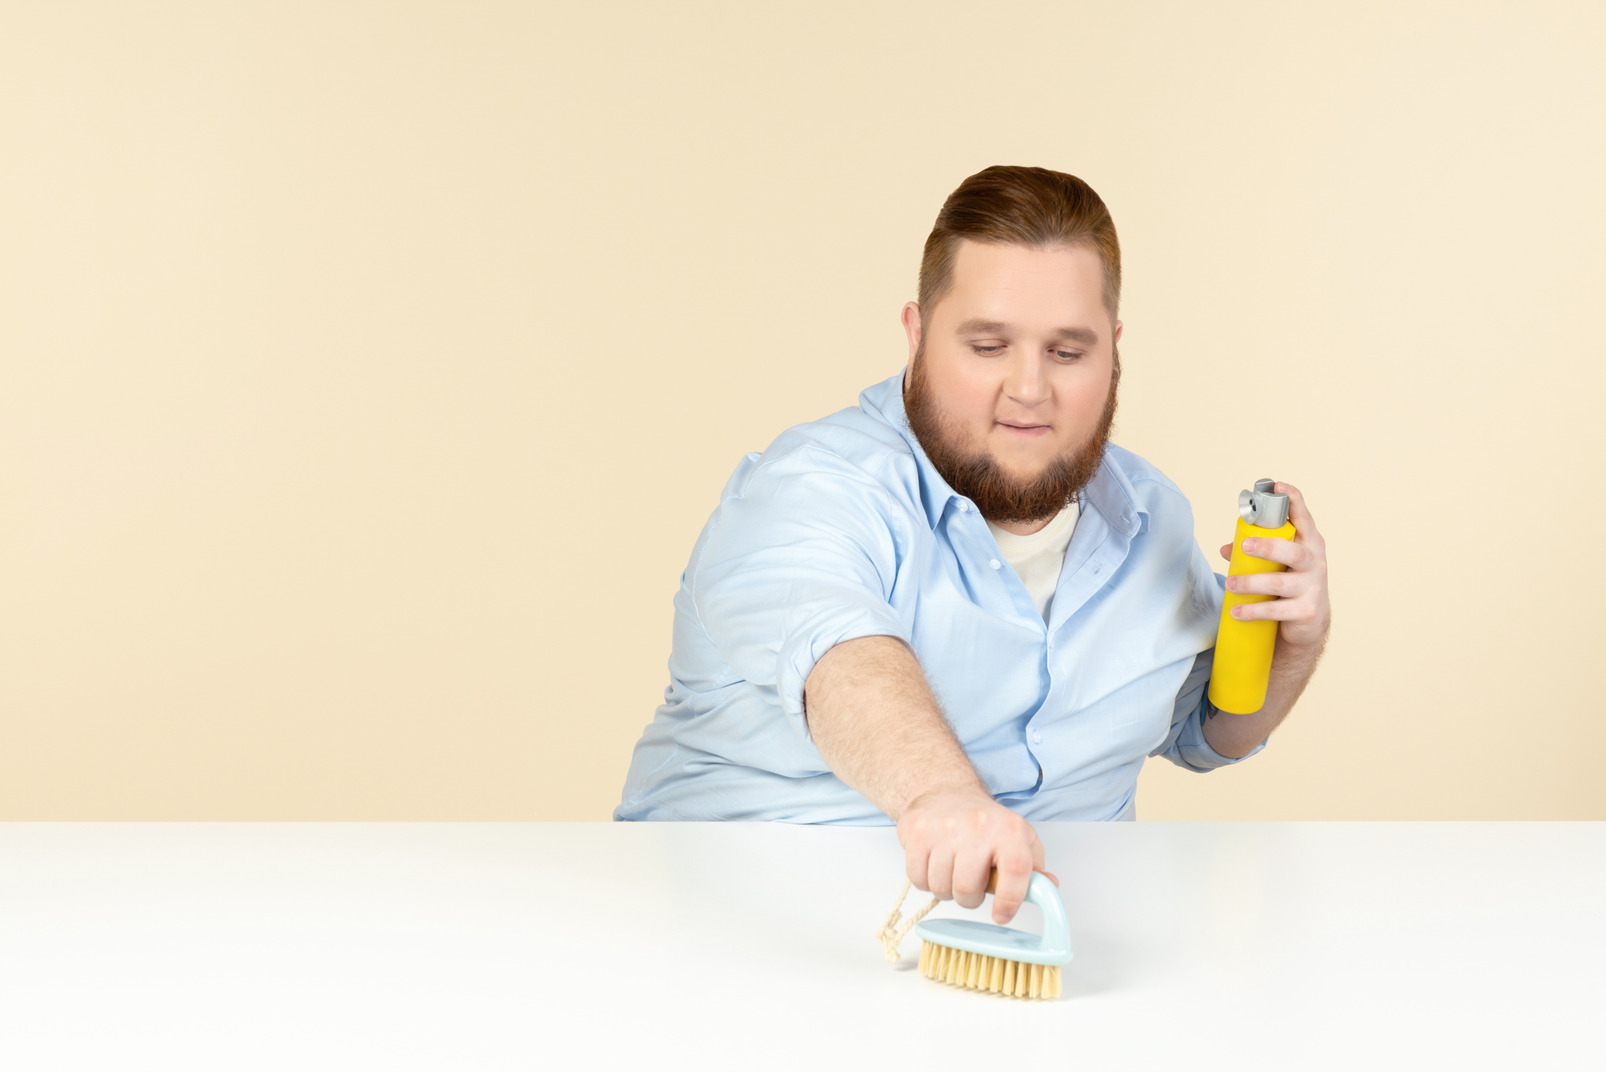 Focused young overweight man cleaning the surface